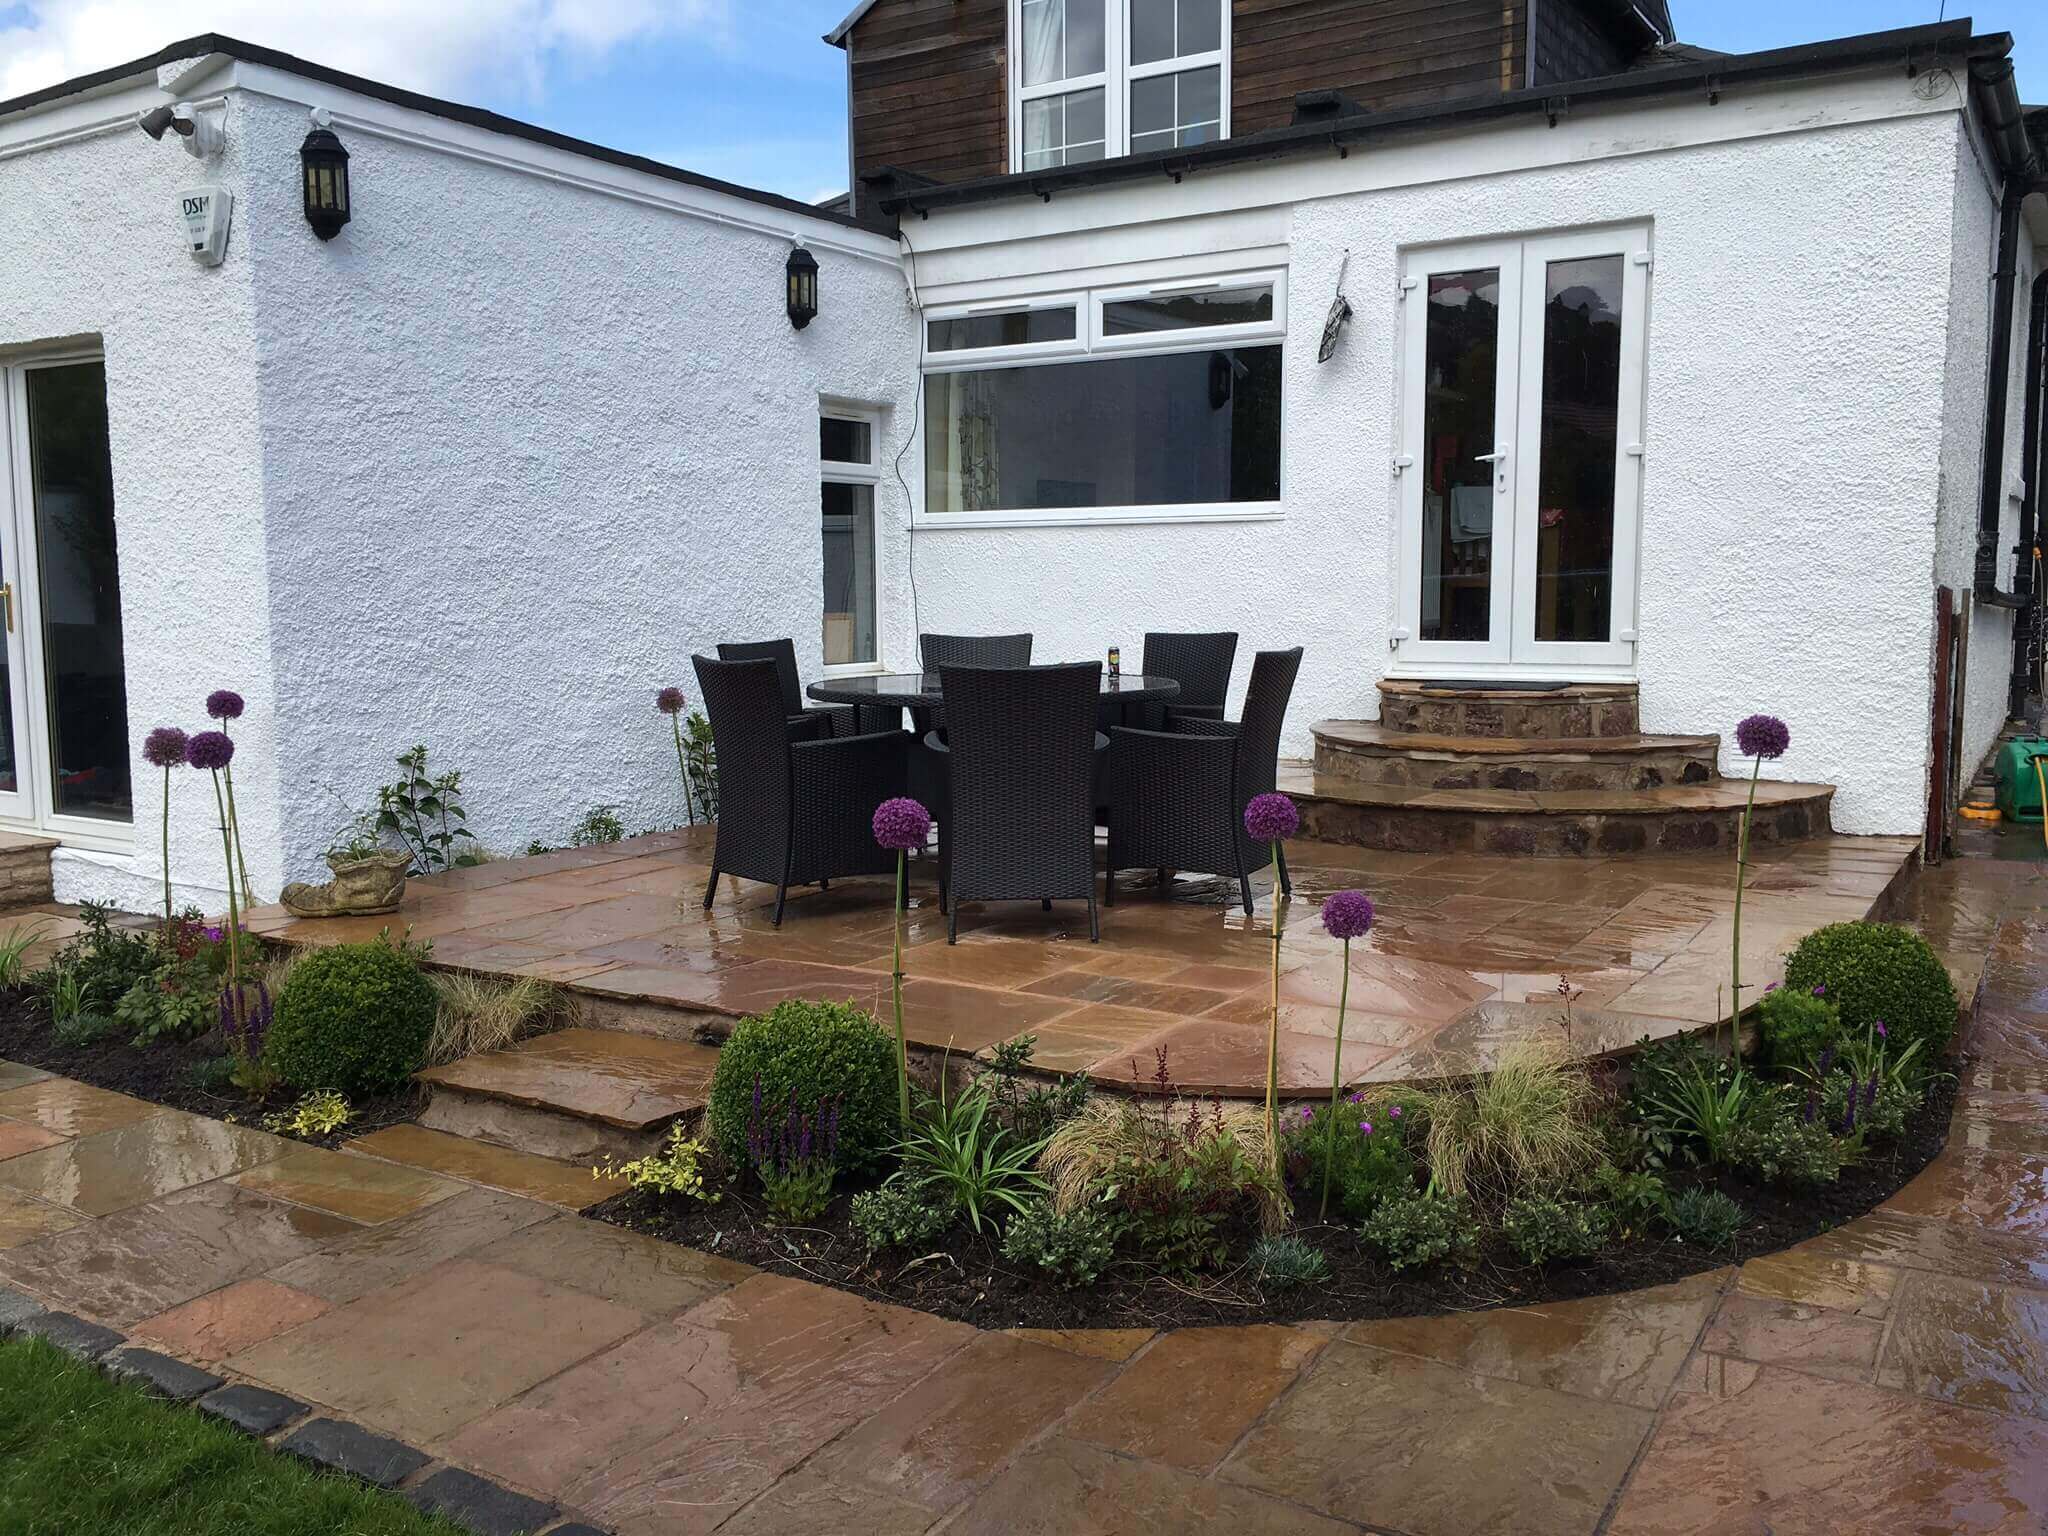   Tobermore Approved Paving Contractors   When you work with us, you receive work completed to above industry standards.   learn more  